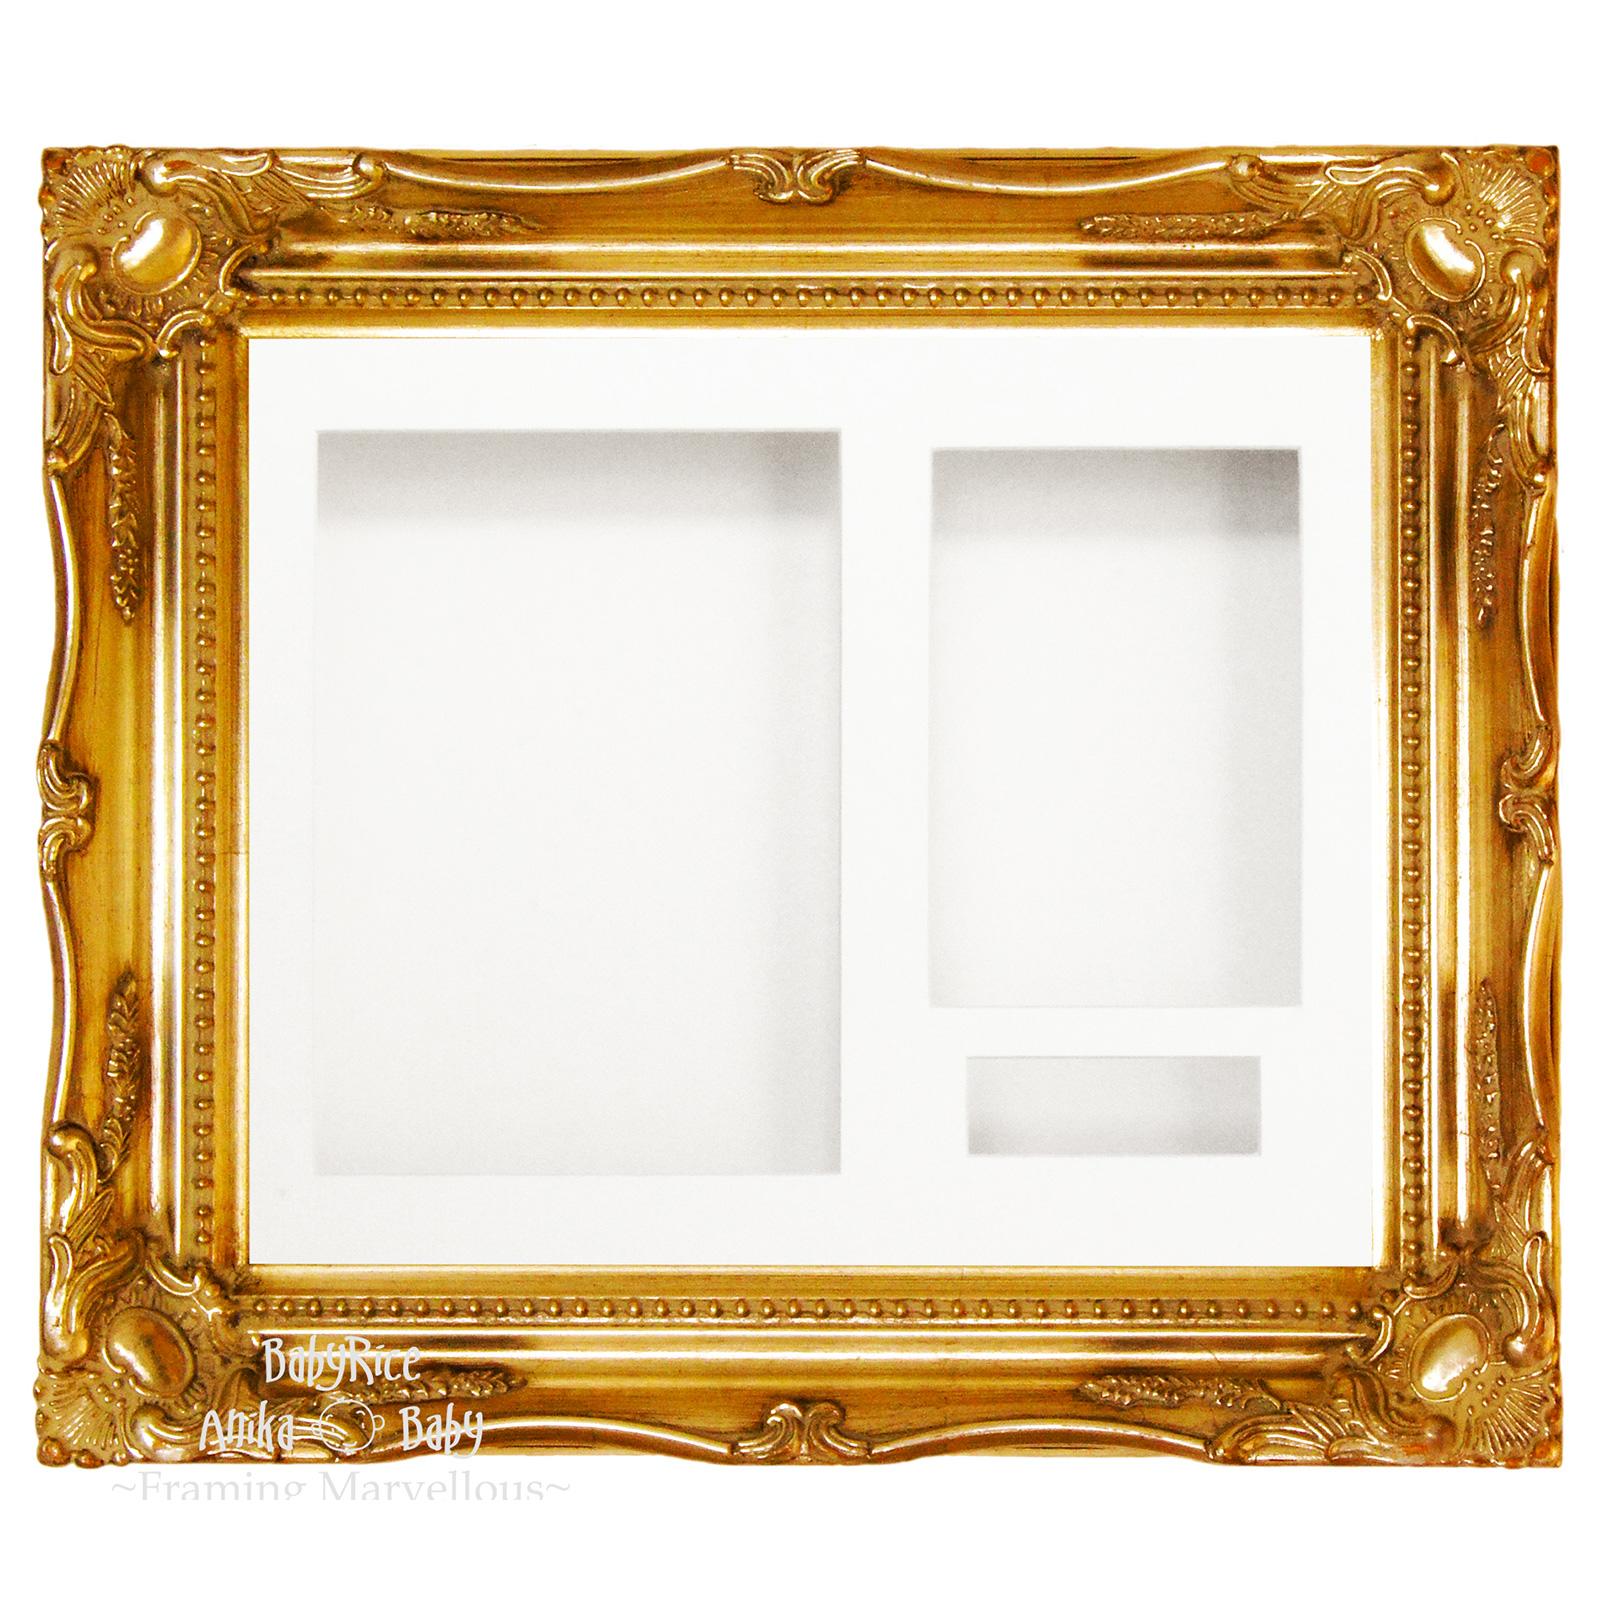 Gold Ornate Rococo frame, White Mount and Backing Card